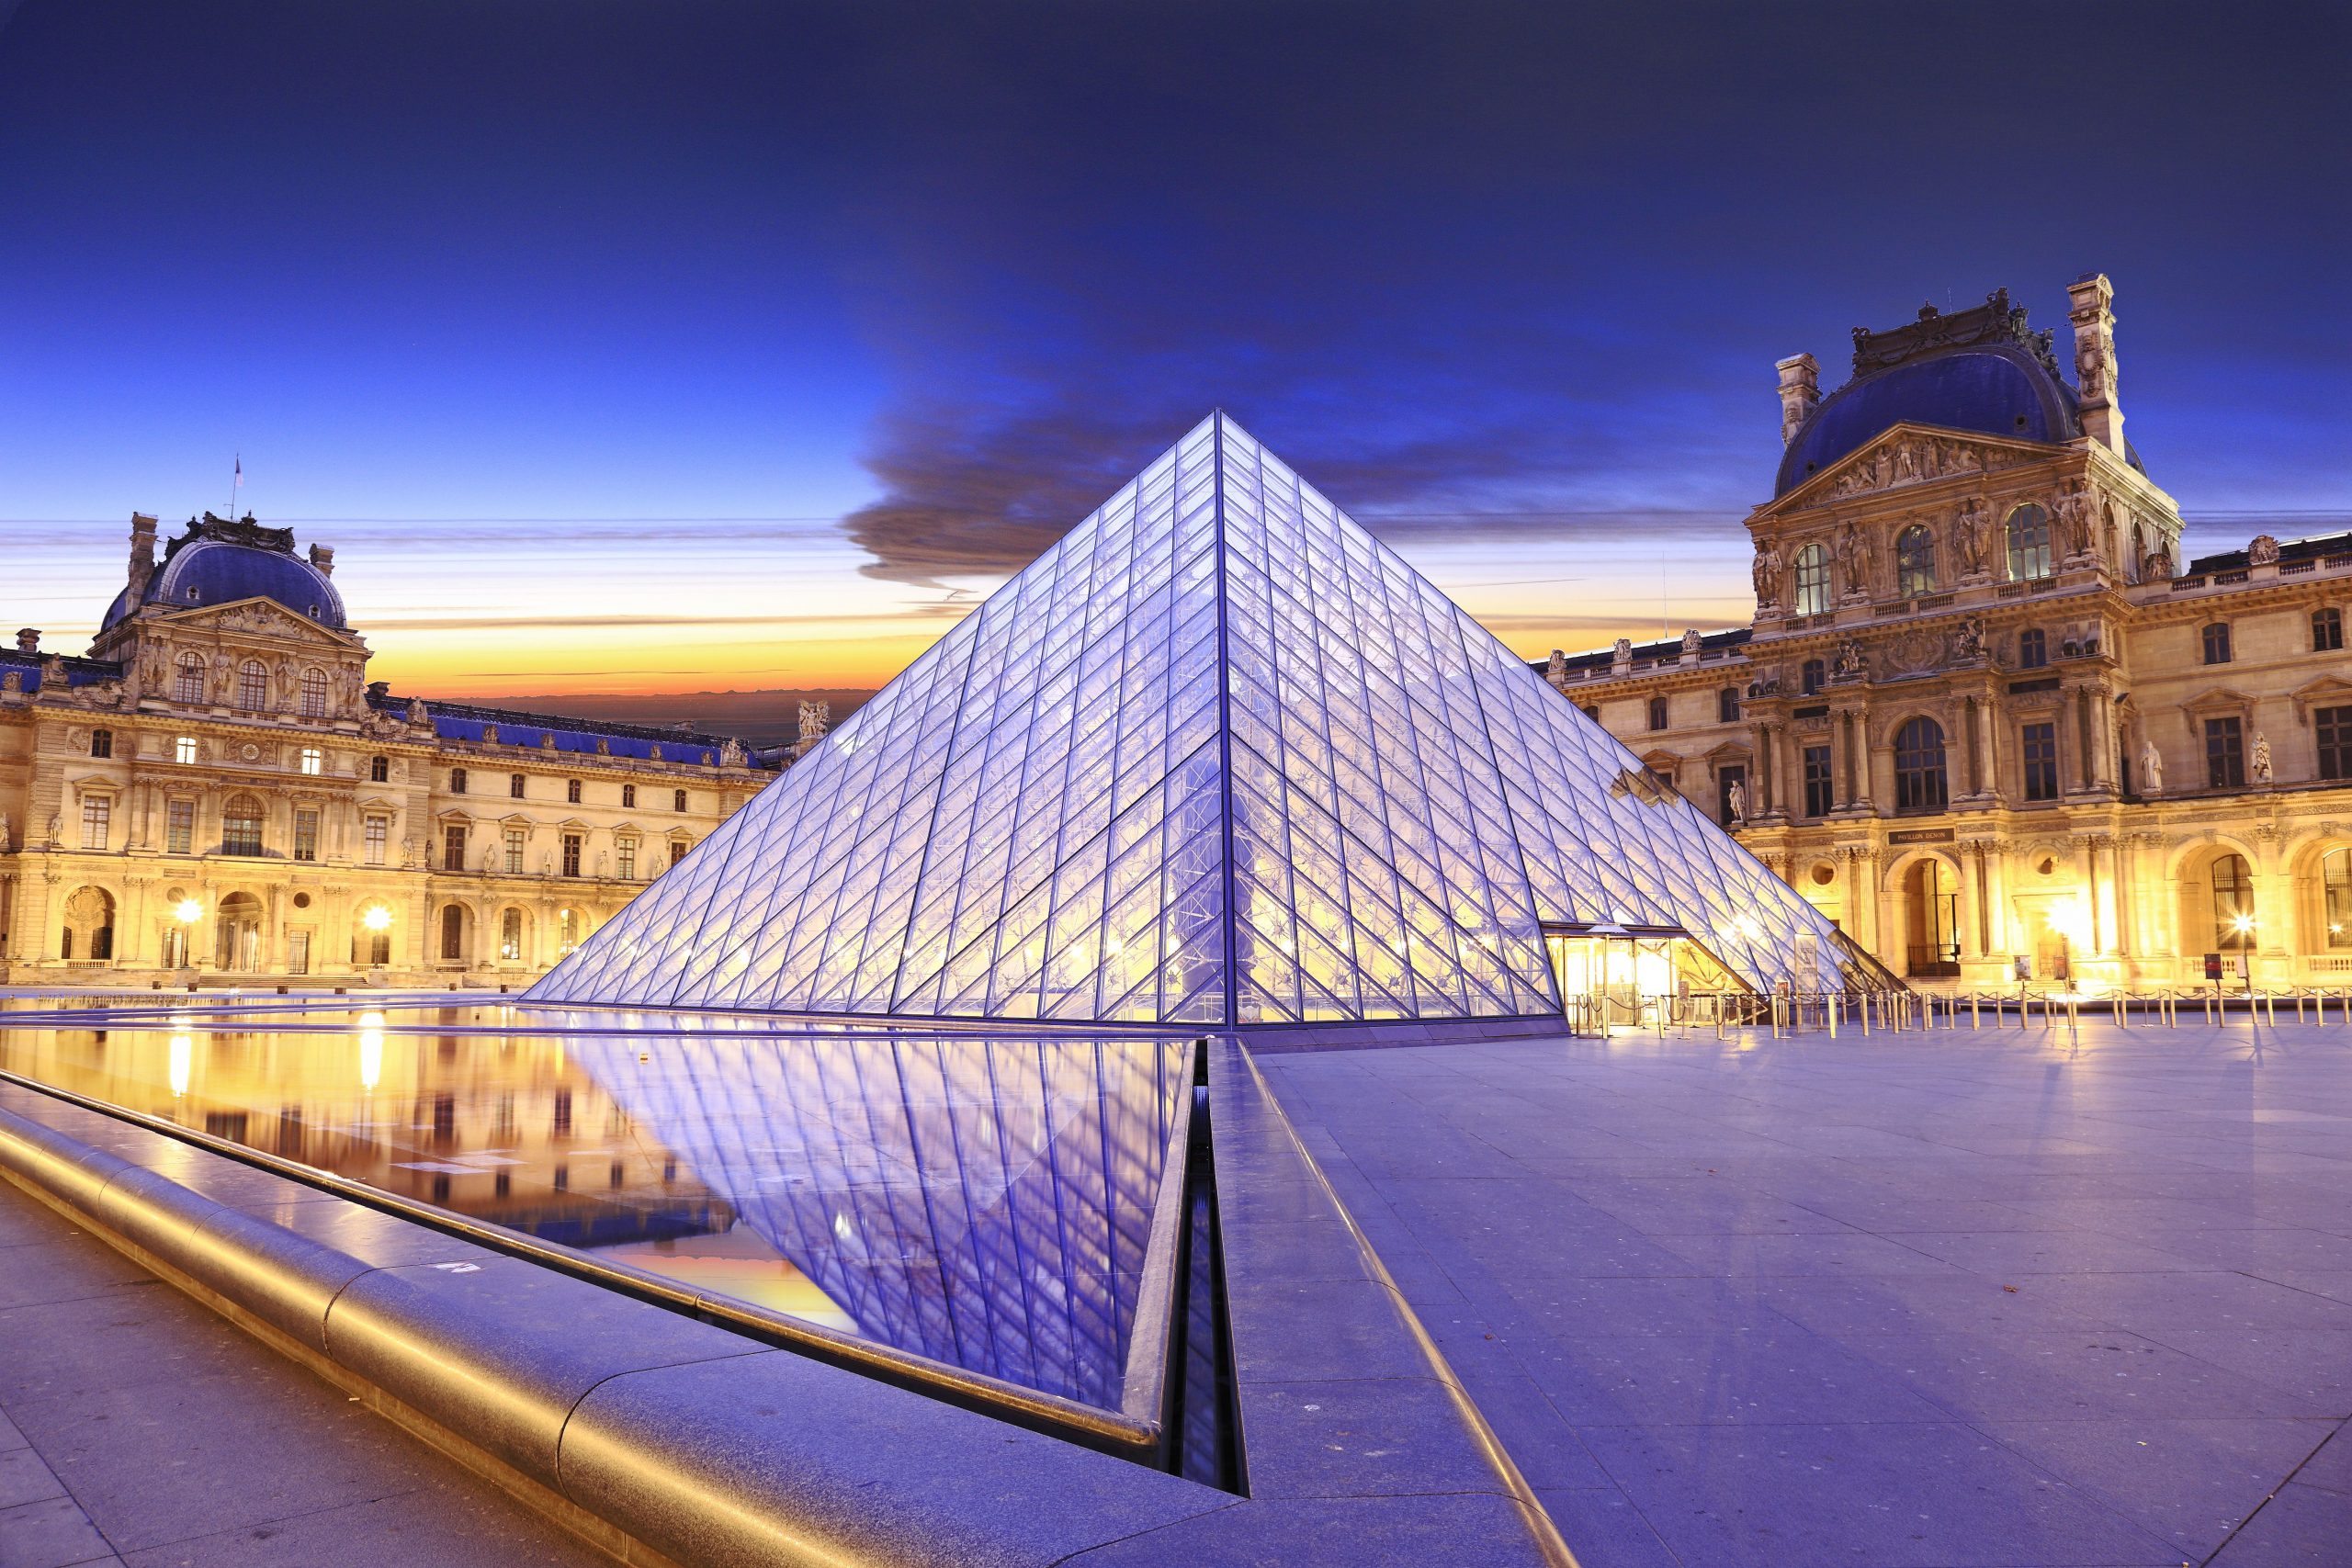 How to Enjoy the Louvre Museum in Paris